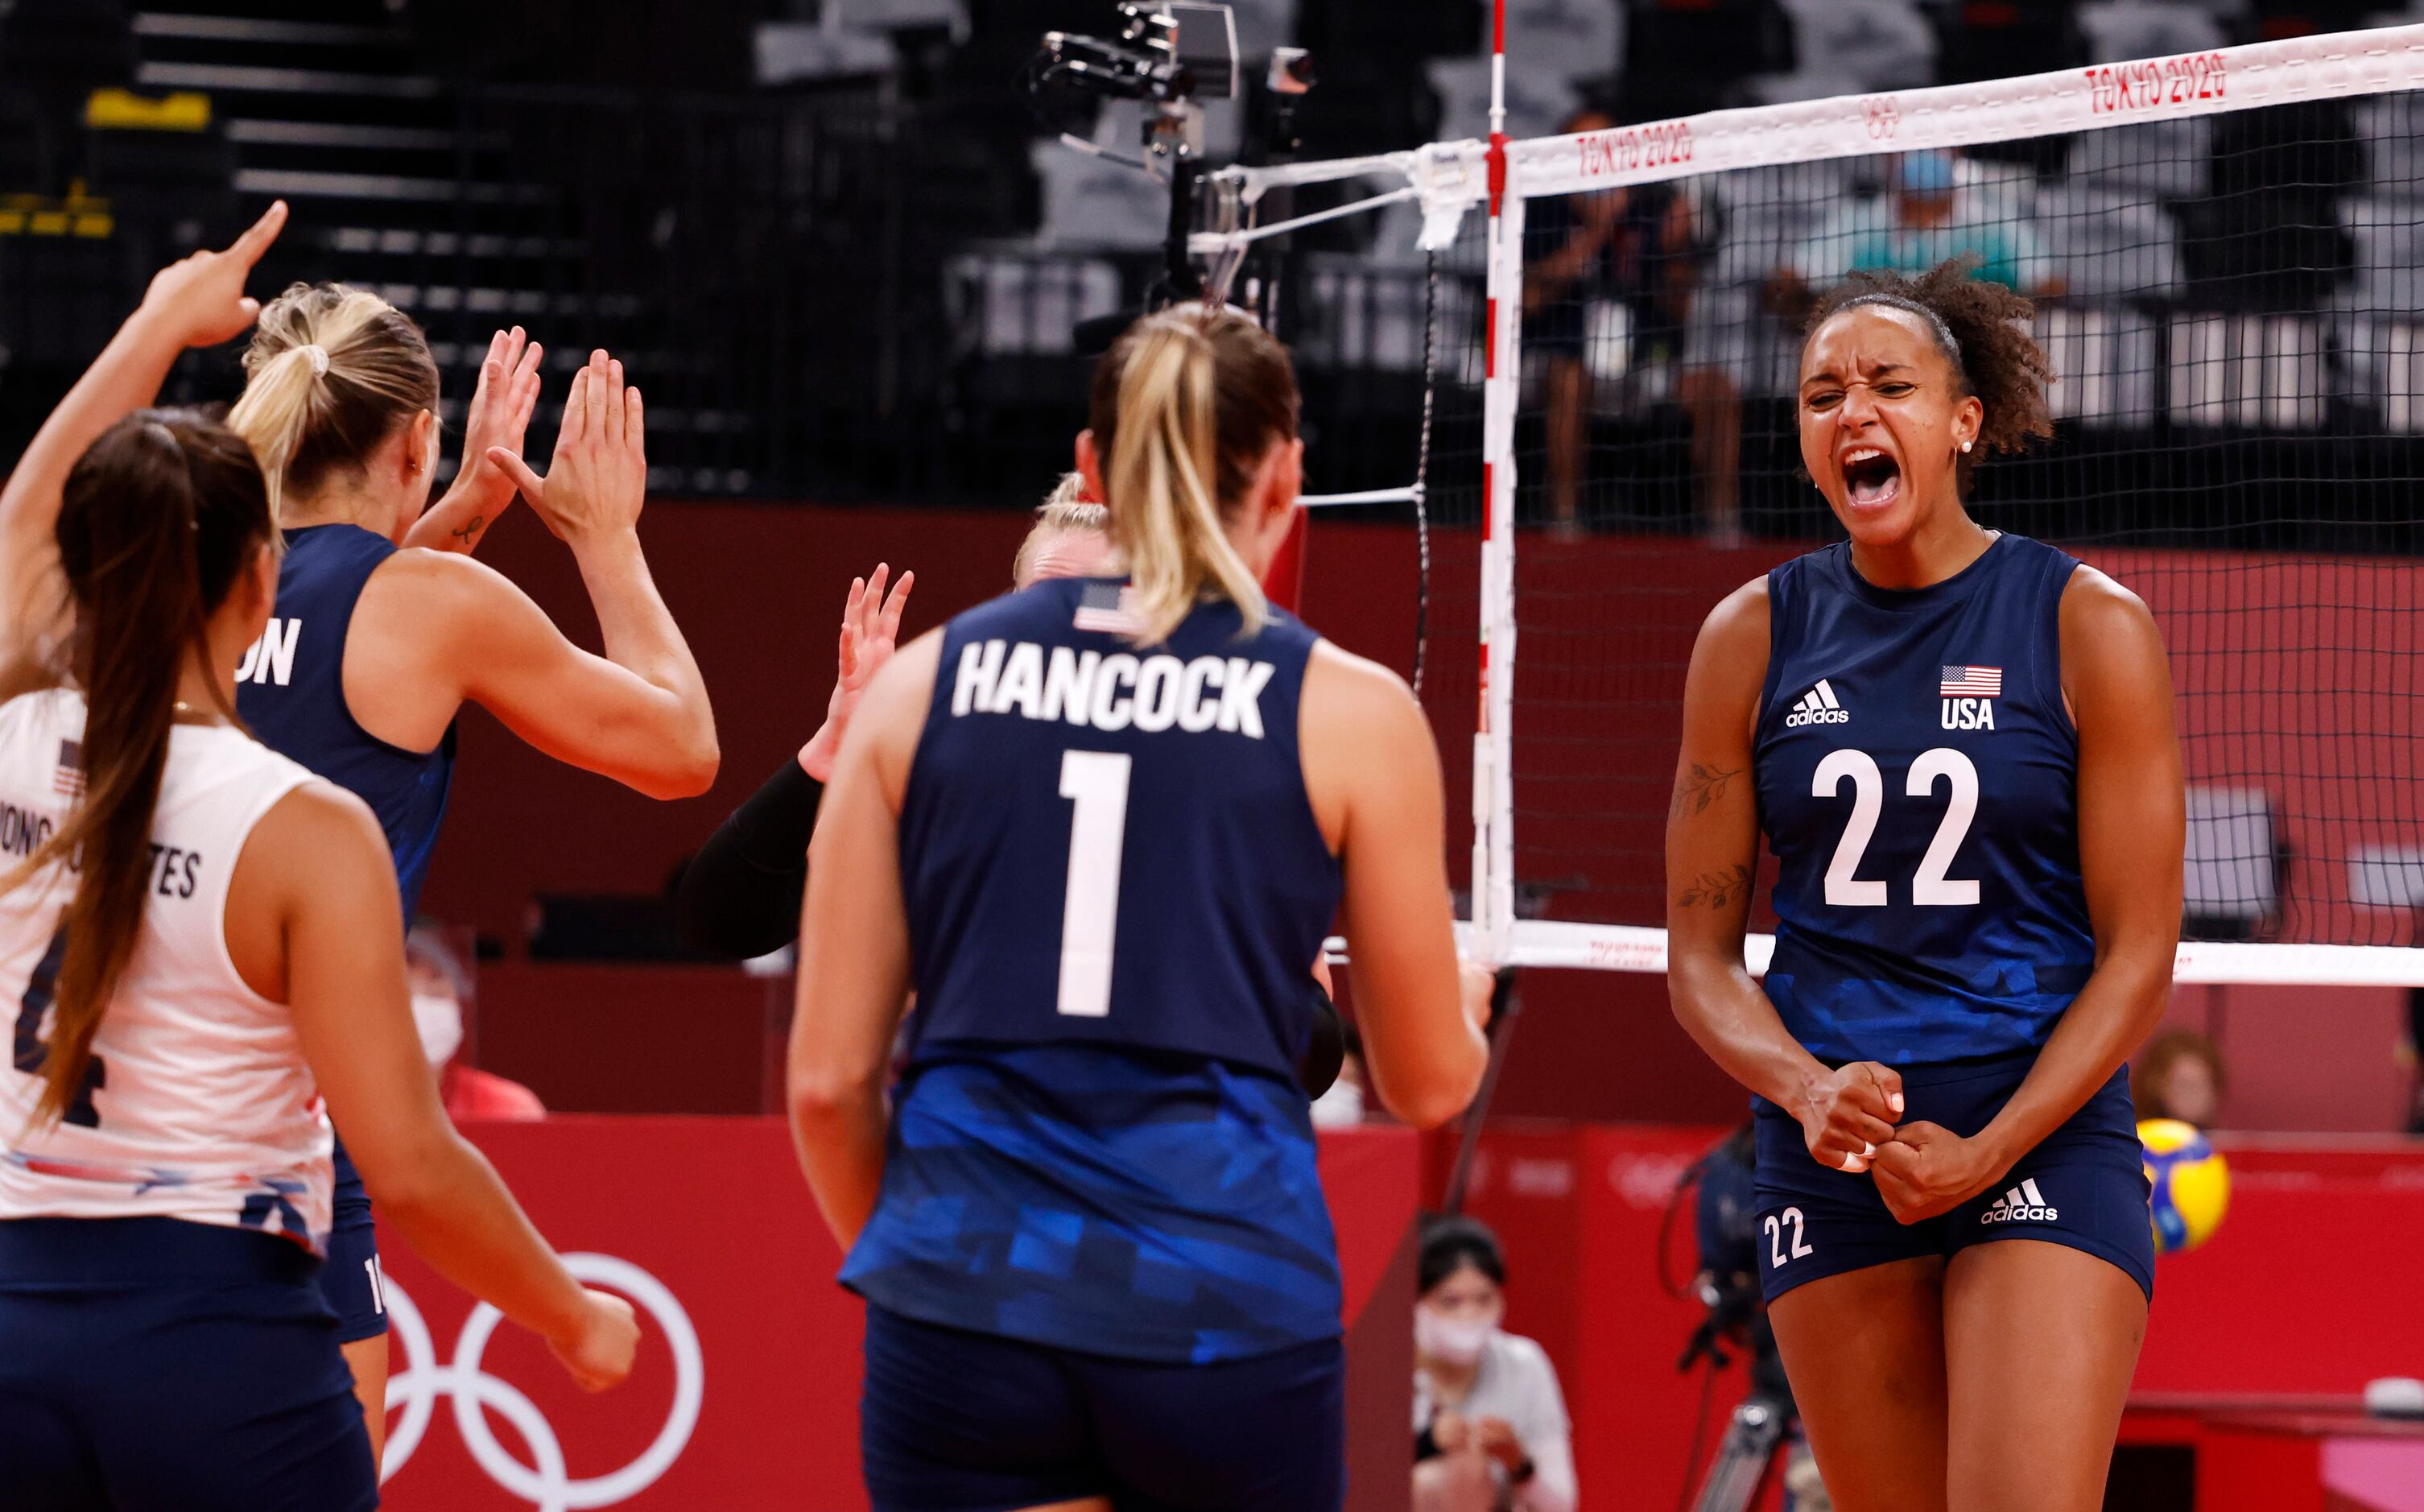 USA’s Haleigh Washington (22) and teammates celebrate after scoring a point against the...